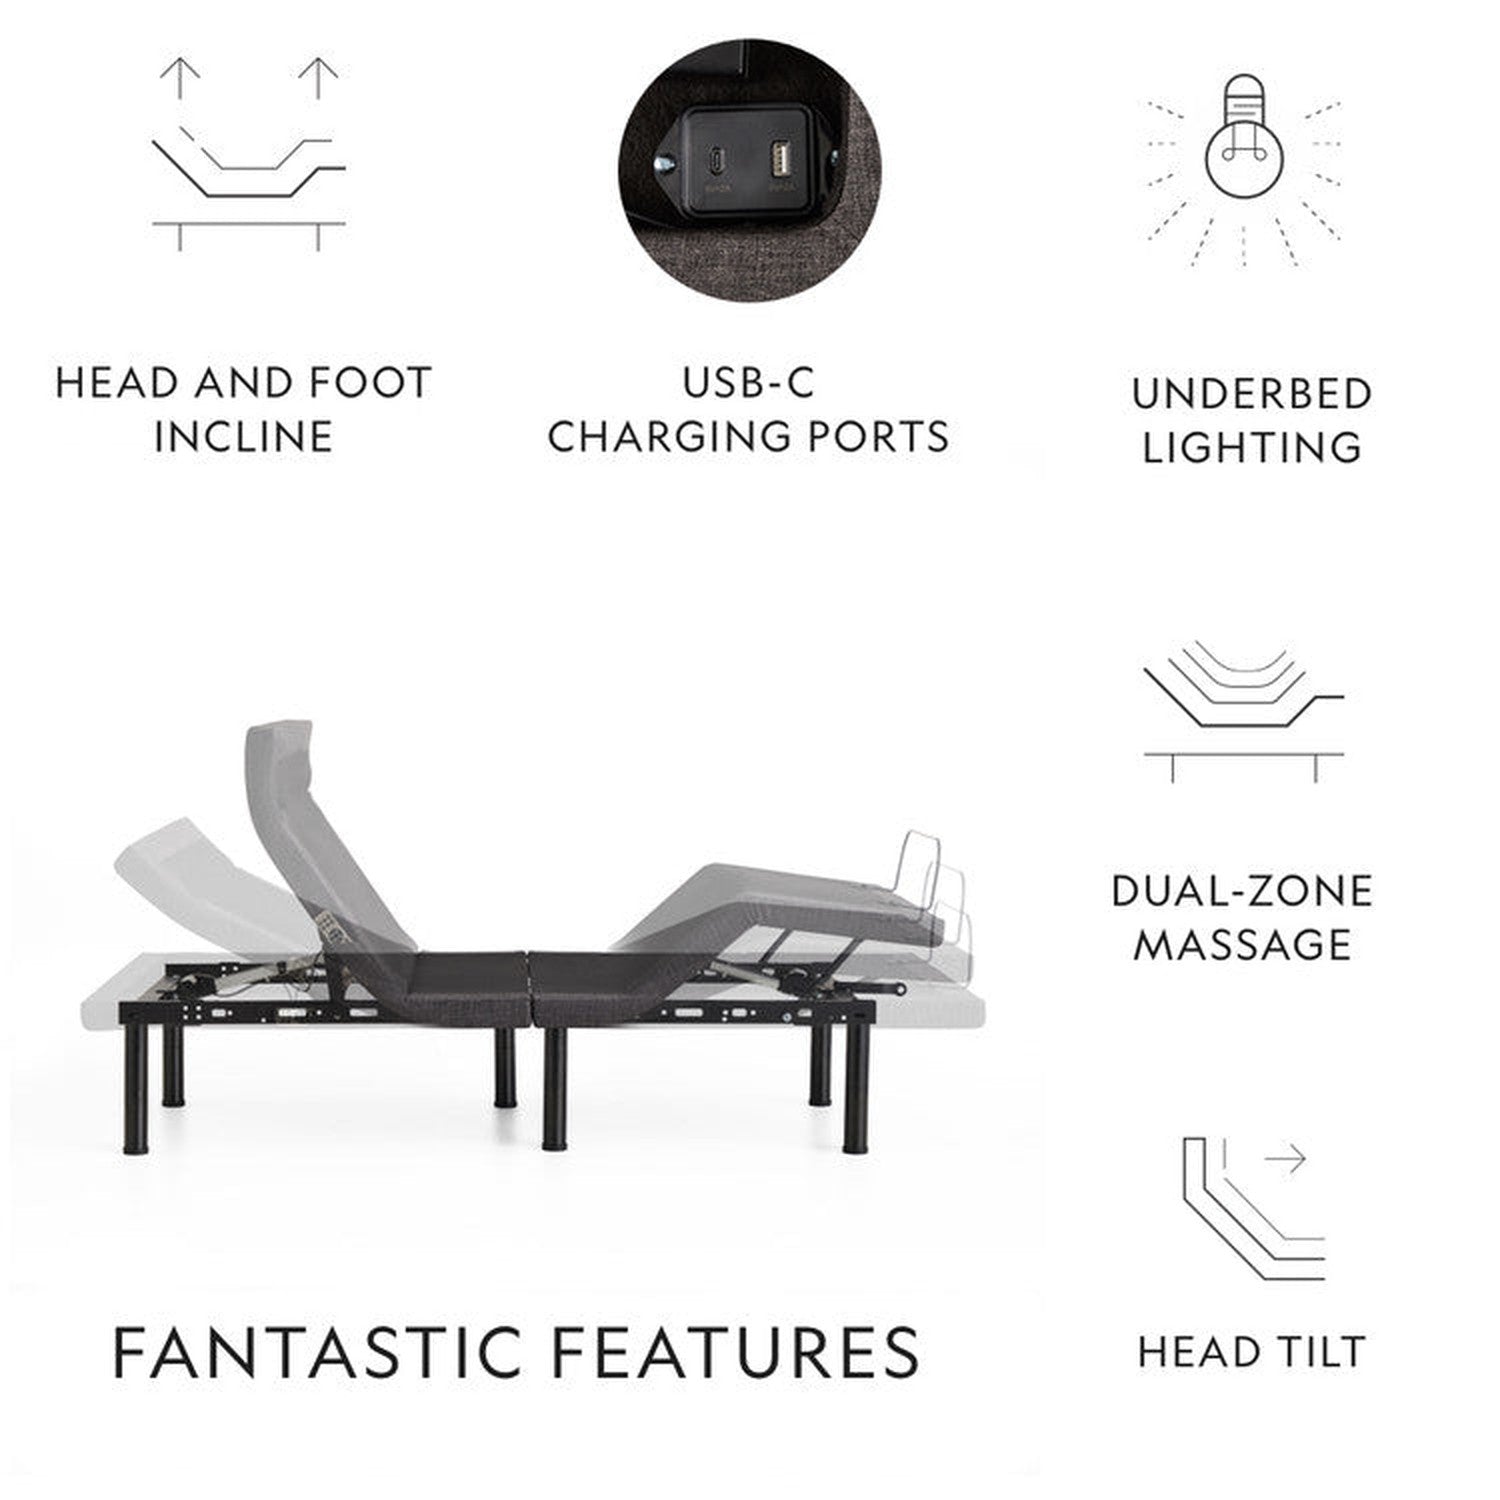 Malouf S655 Adjustable Bed Base-Purely Relaxation